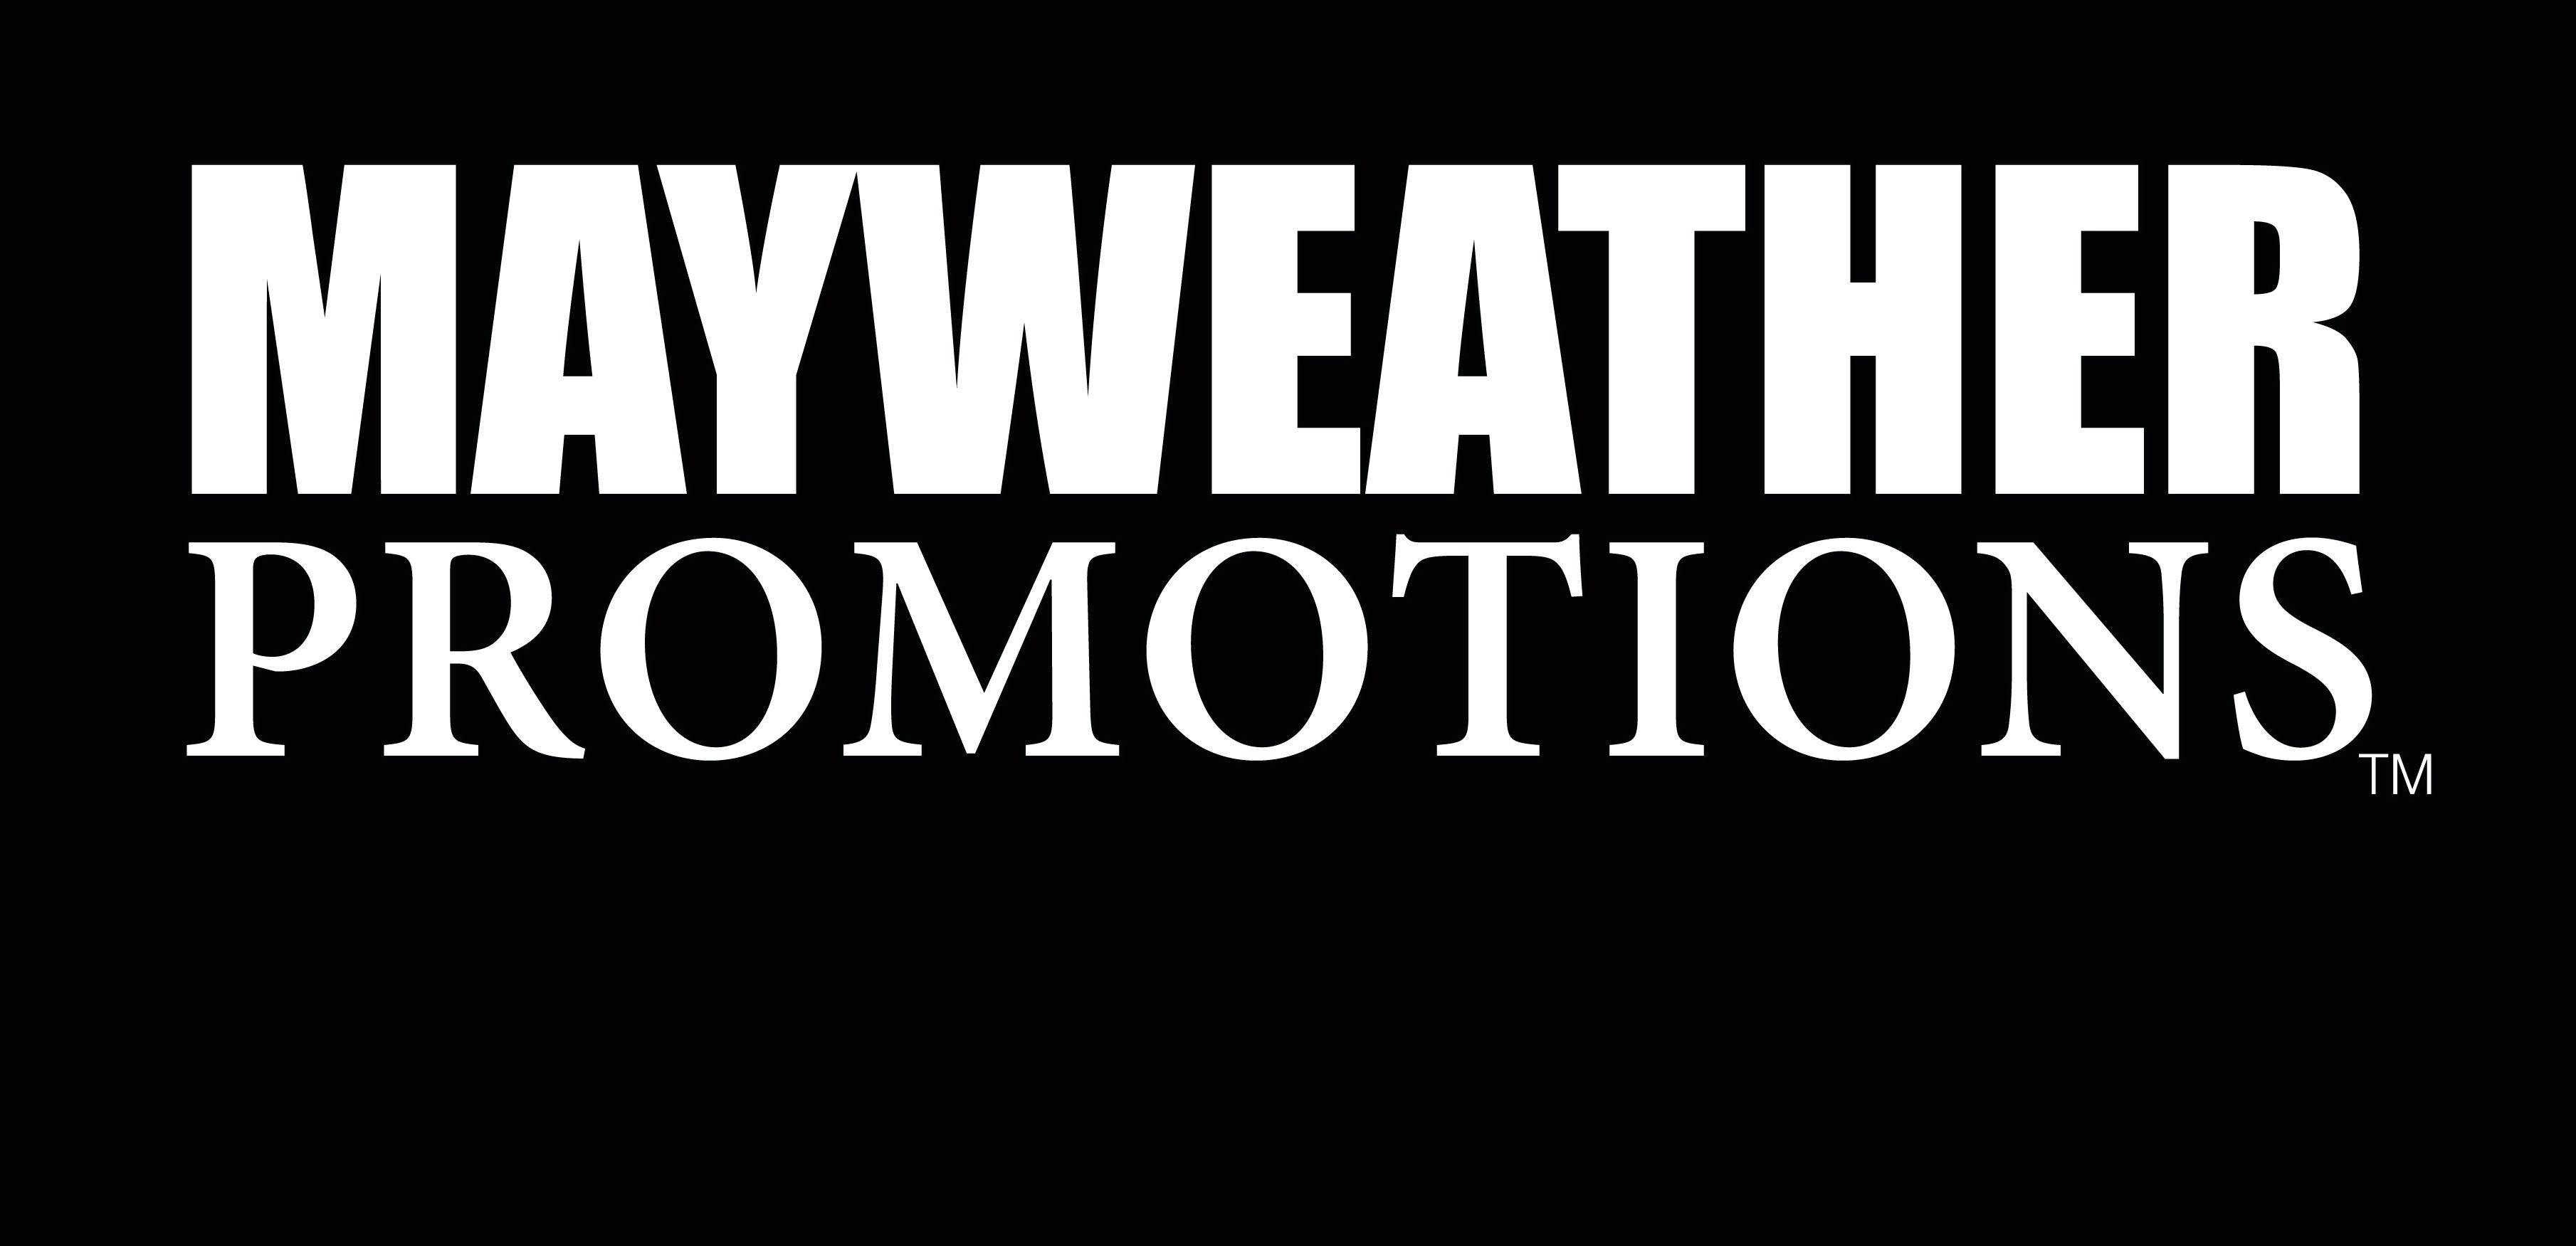 Mayweather Logo - Mayweather Promotions Archives | REAL COMBAT MEDIA